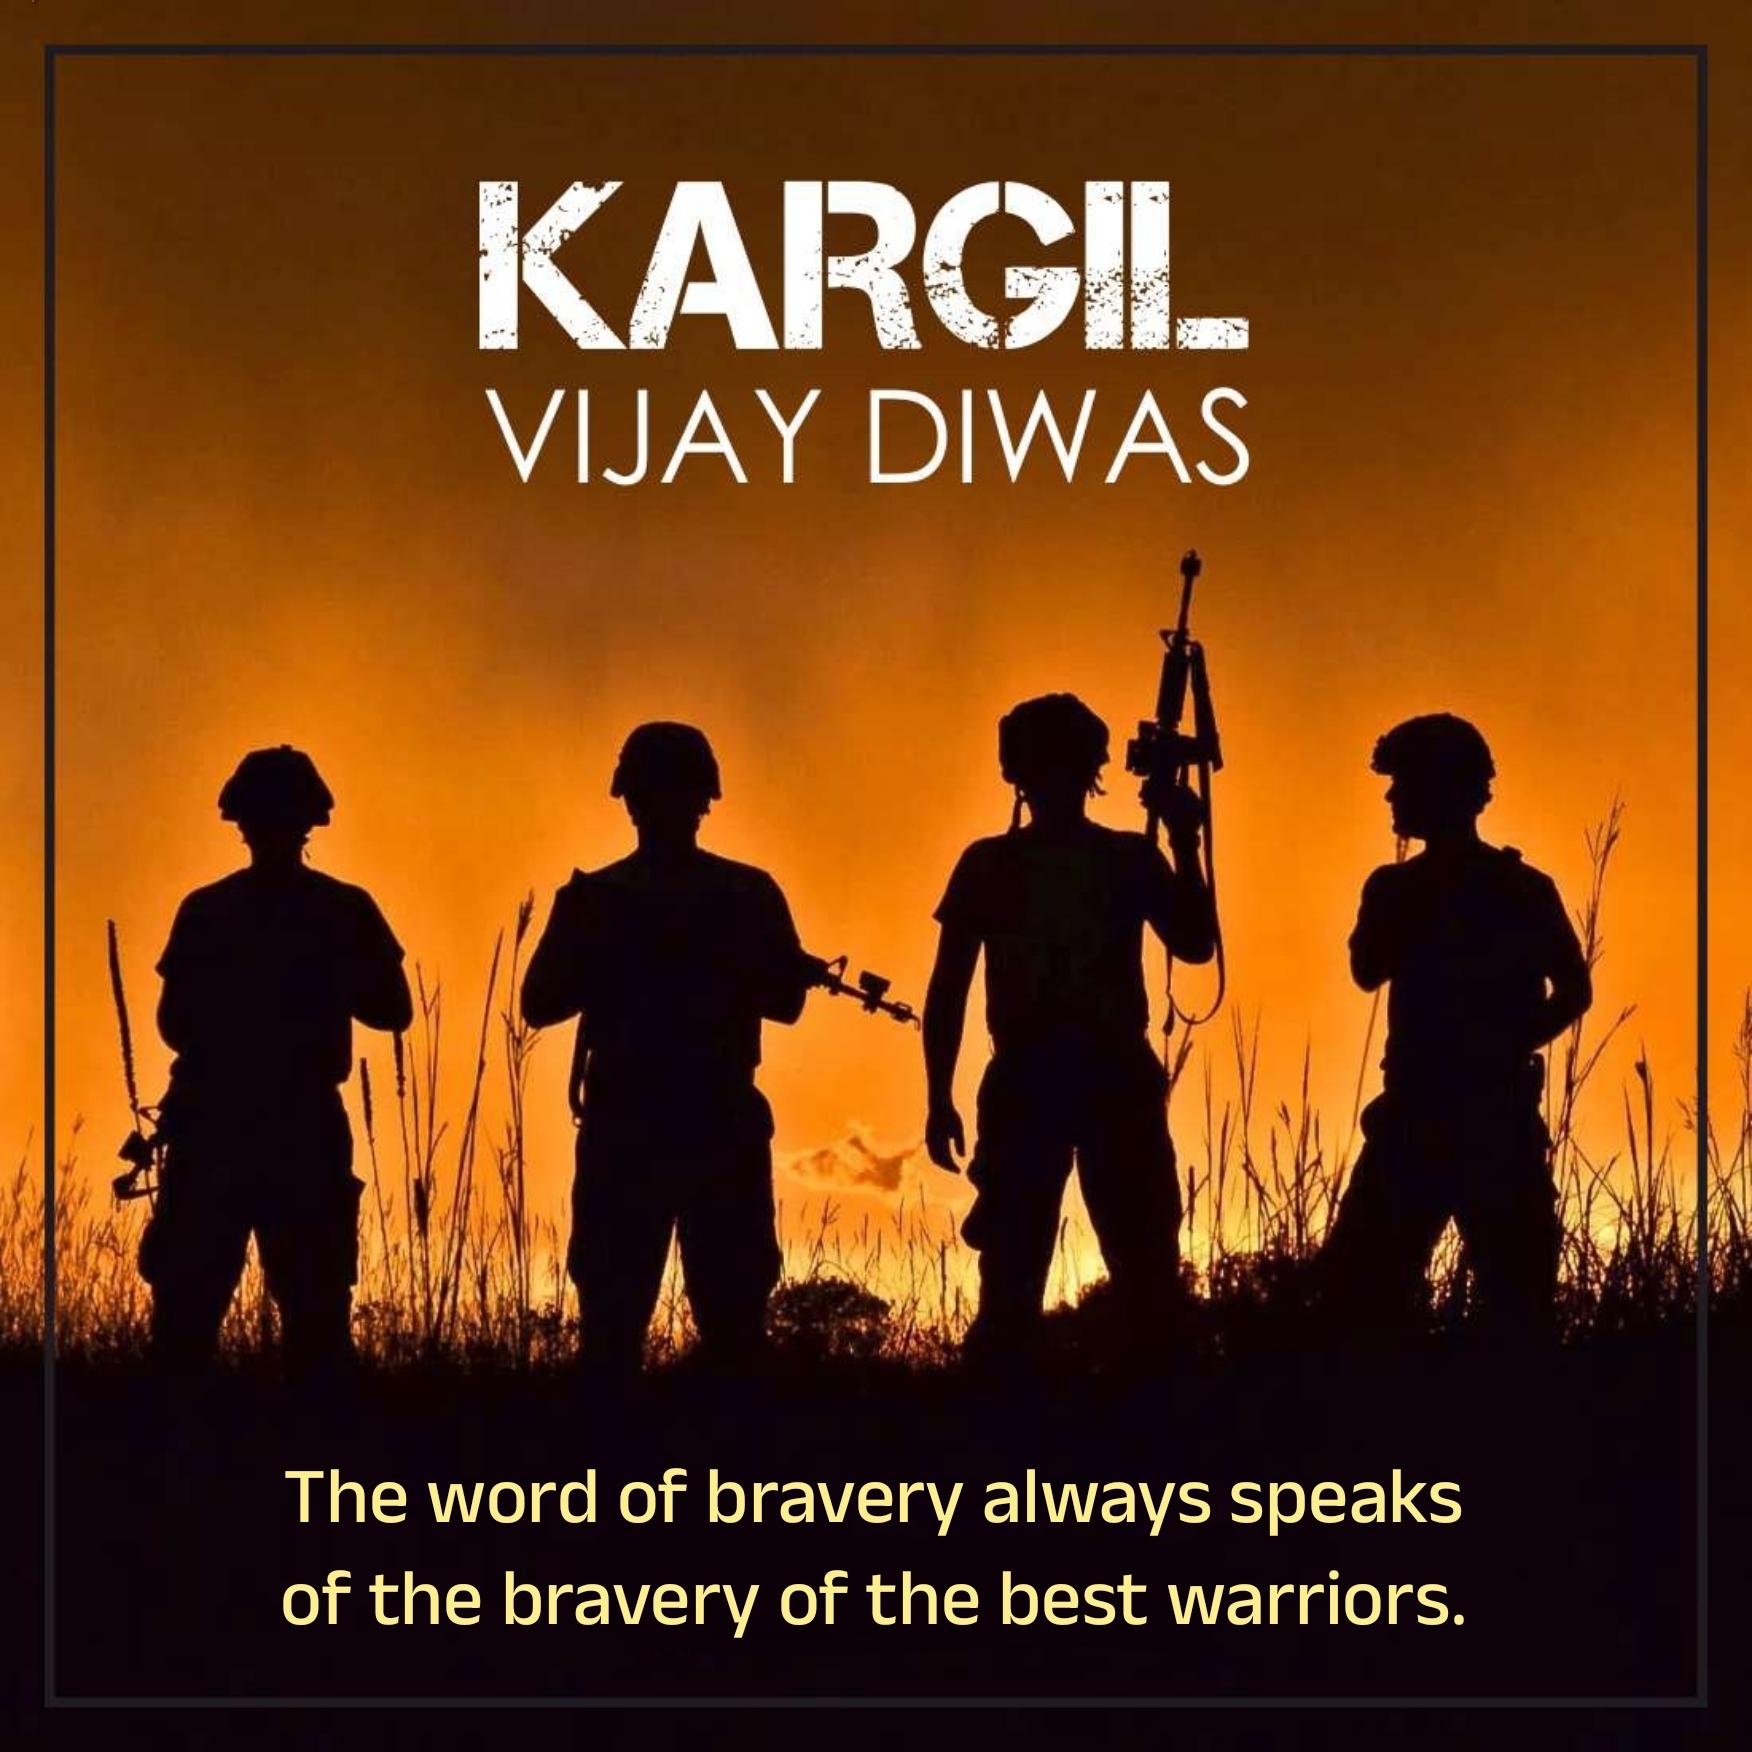 The word of bravery always speaks of the bravery of the best warriors